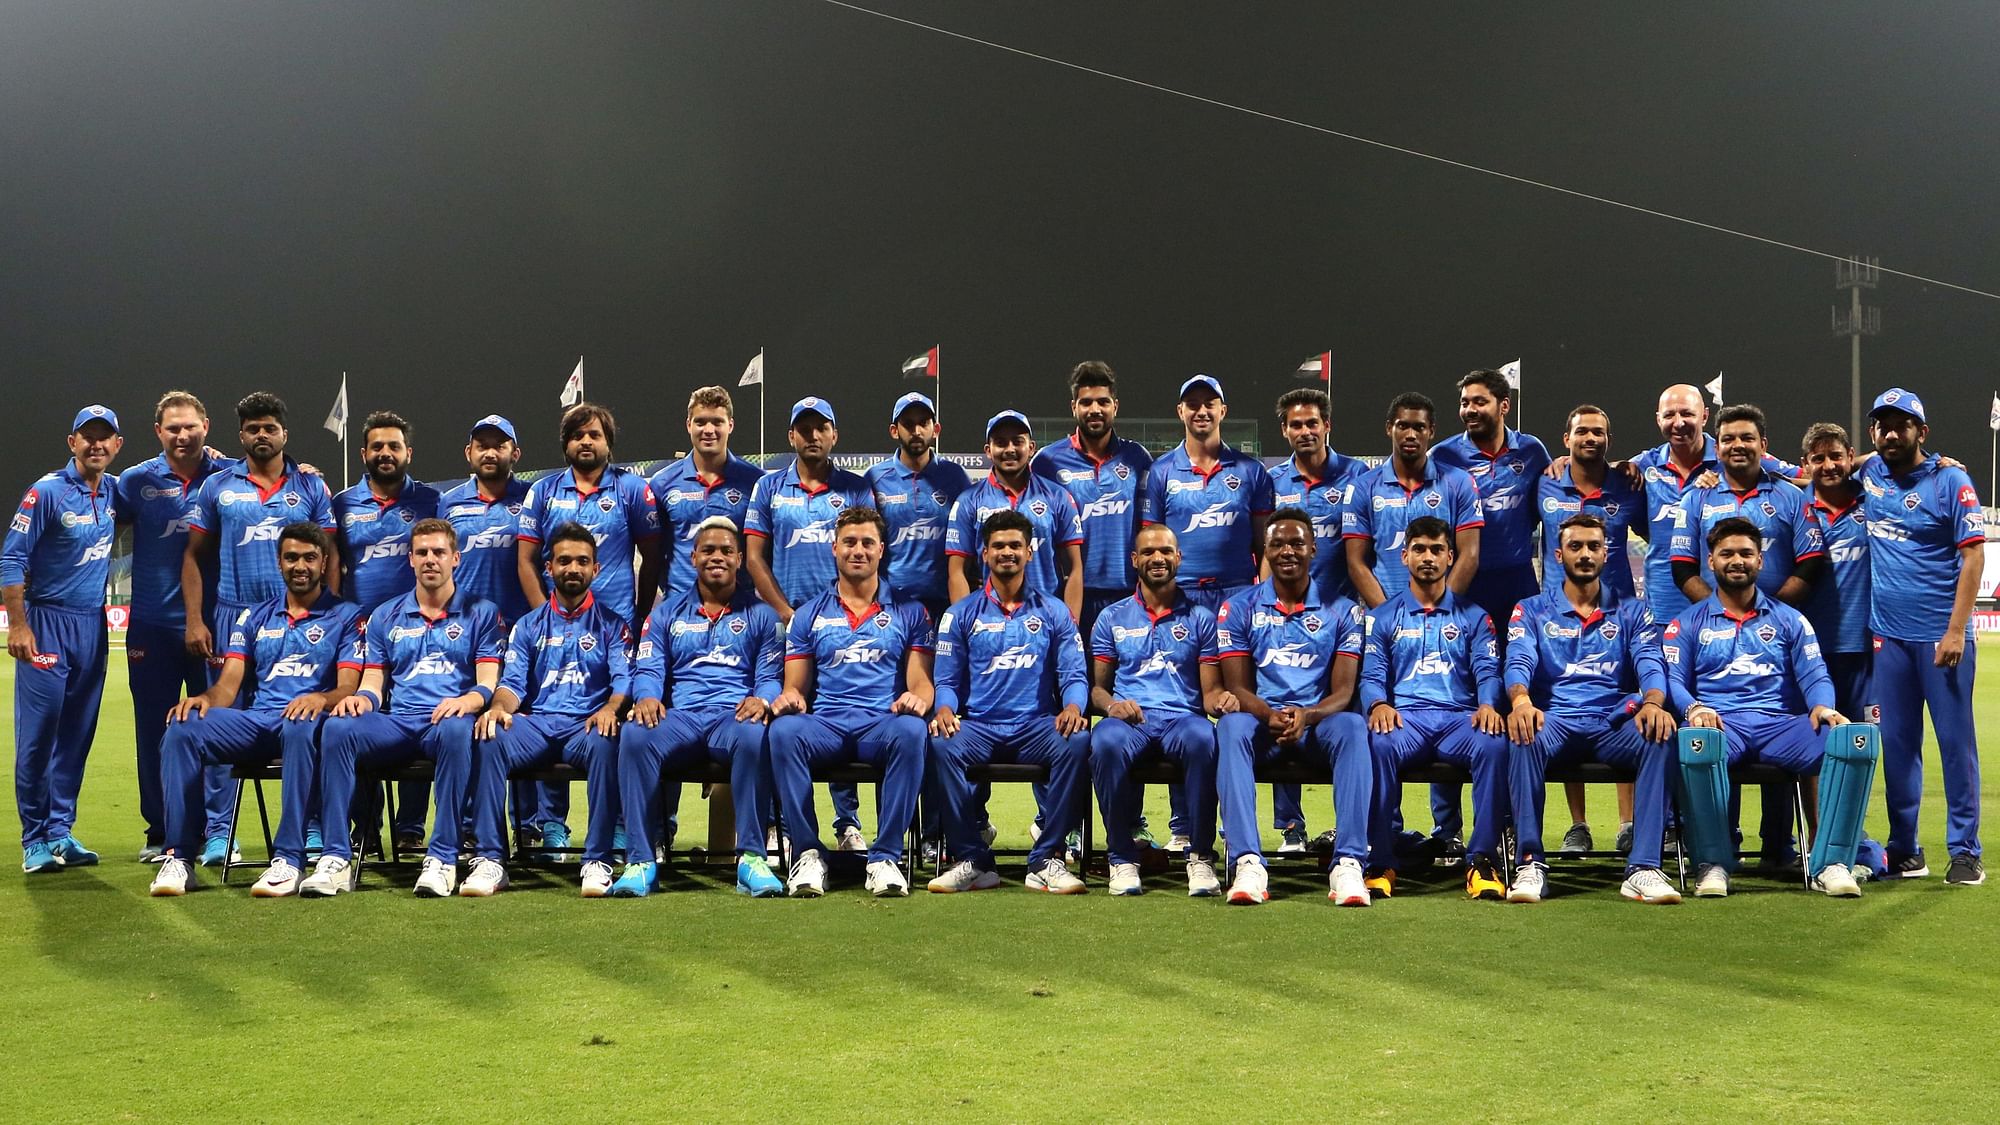 Delhi Capitals during a photo session in the mid-innings break in Qualifier 2 on Sunday